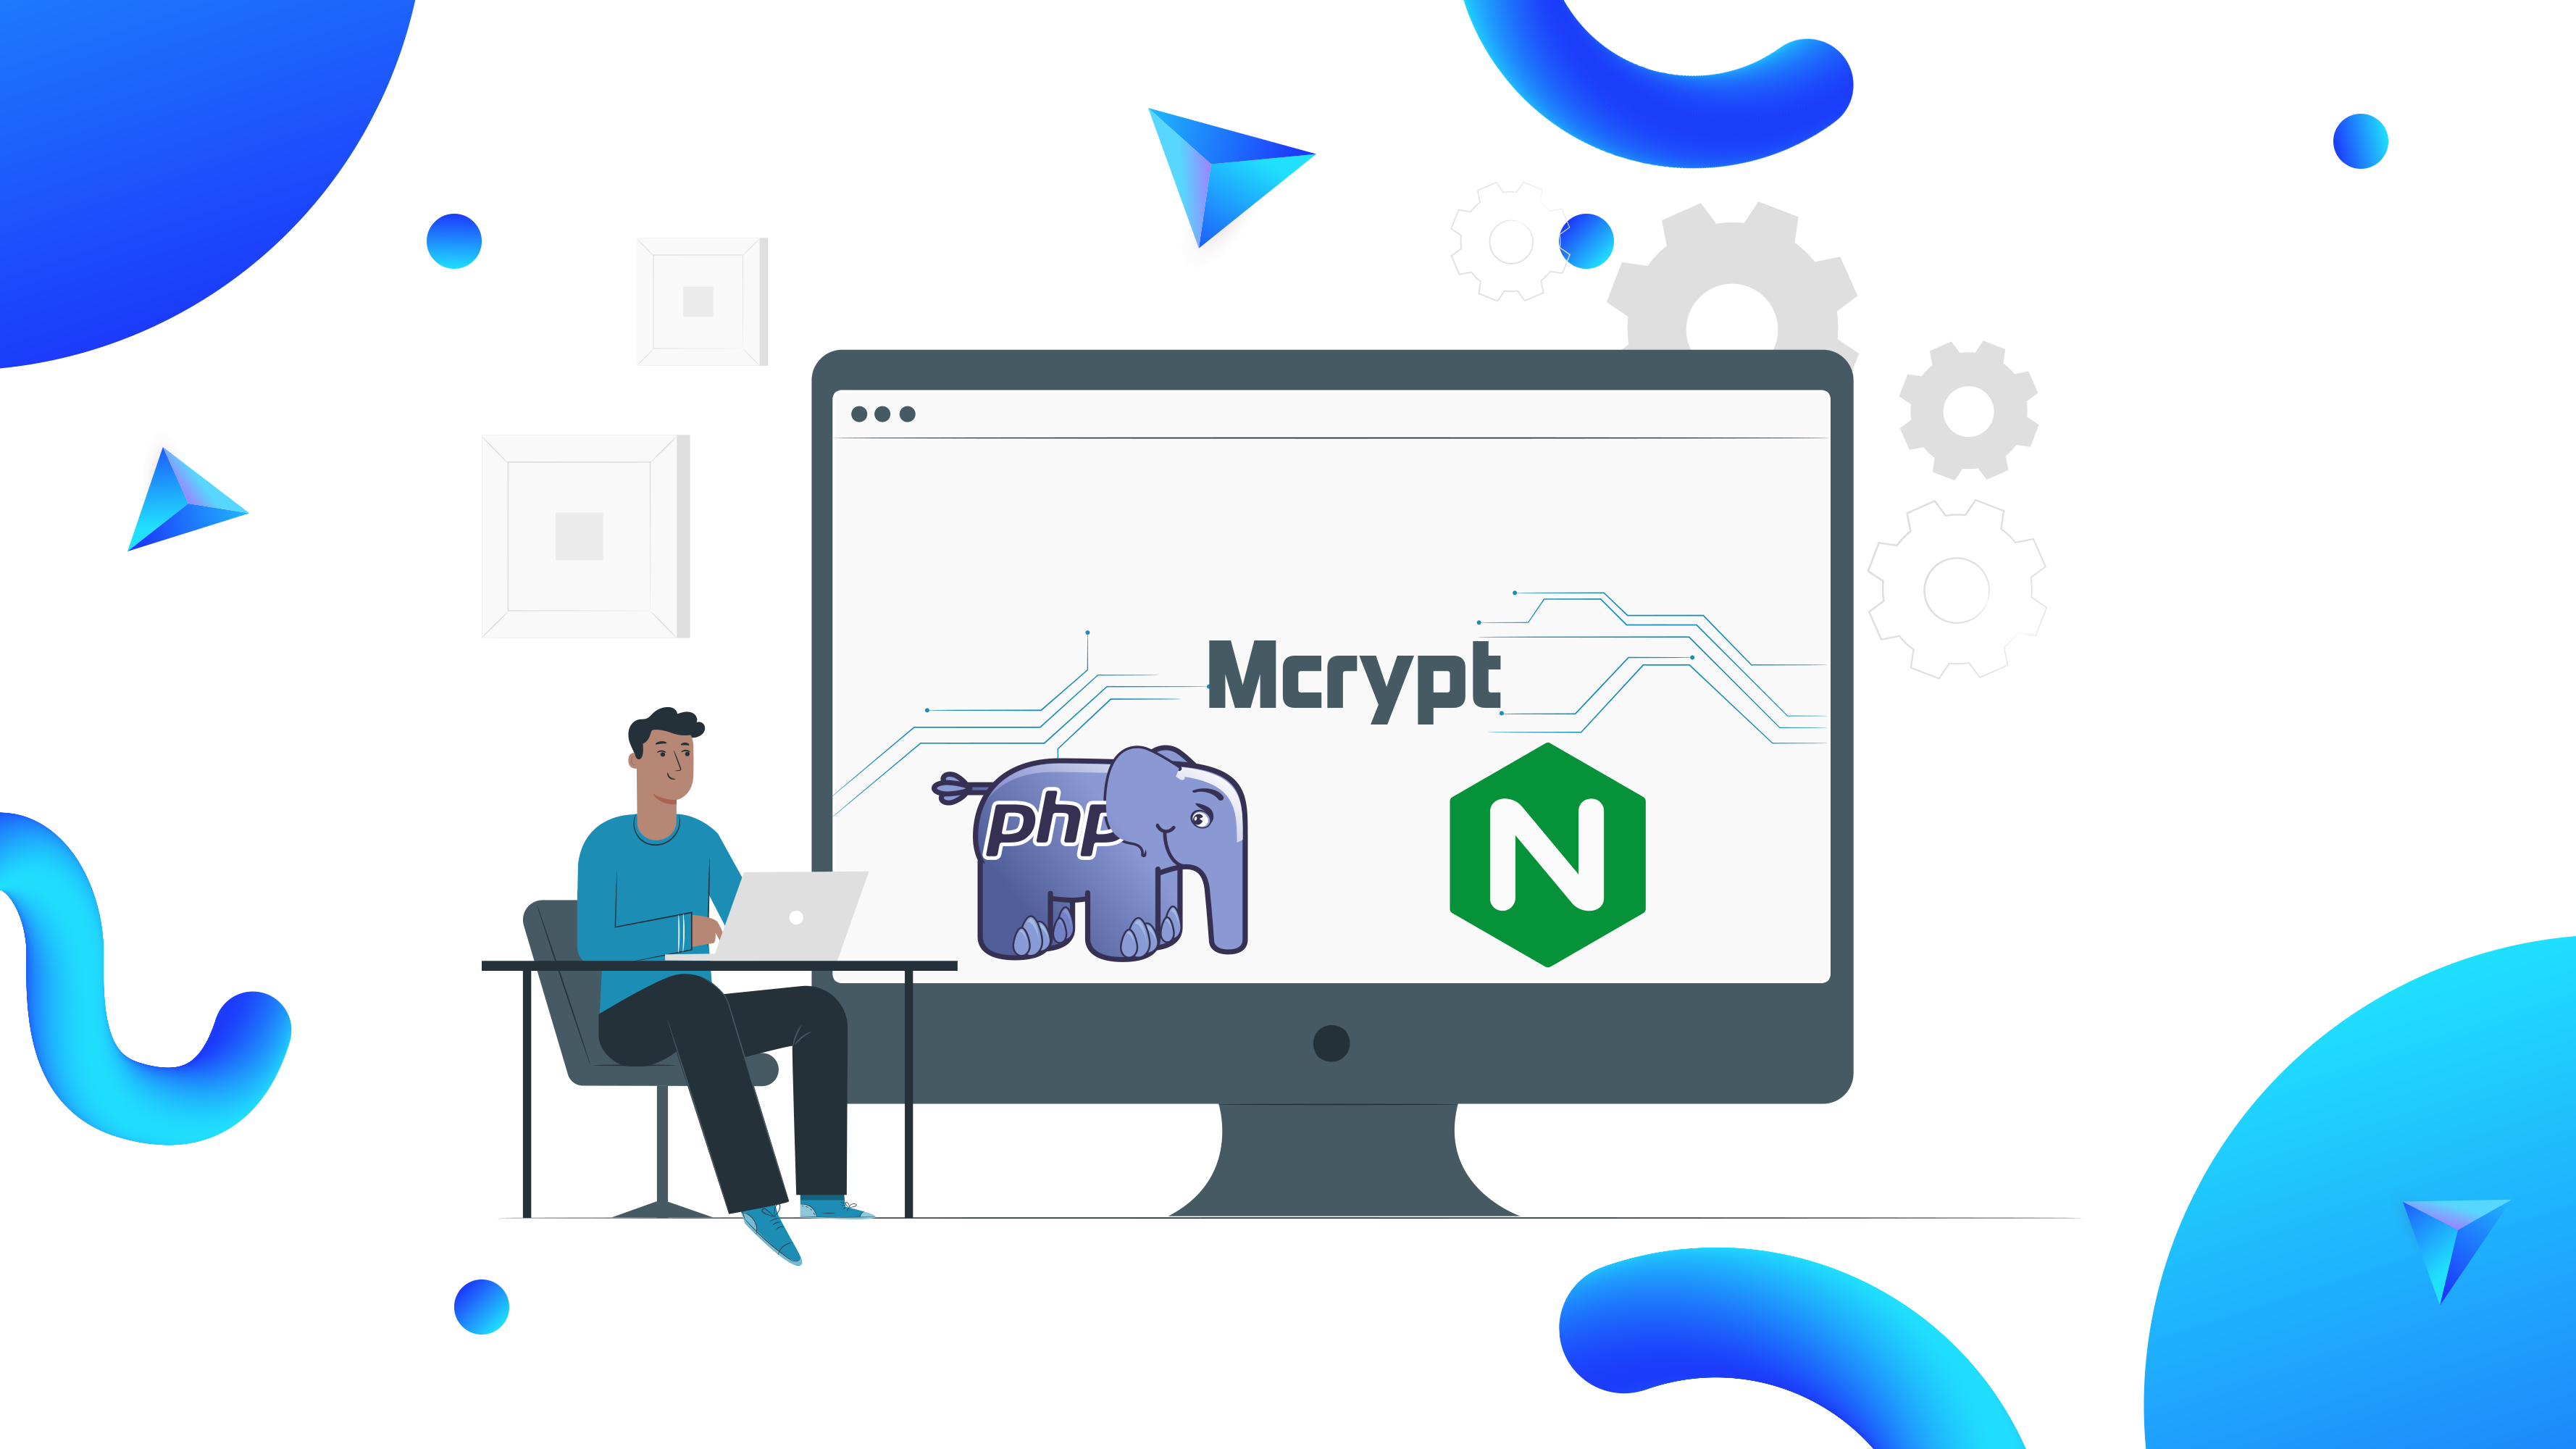 mycrypt php extension